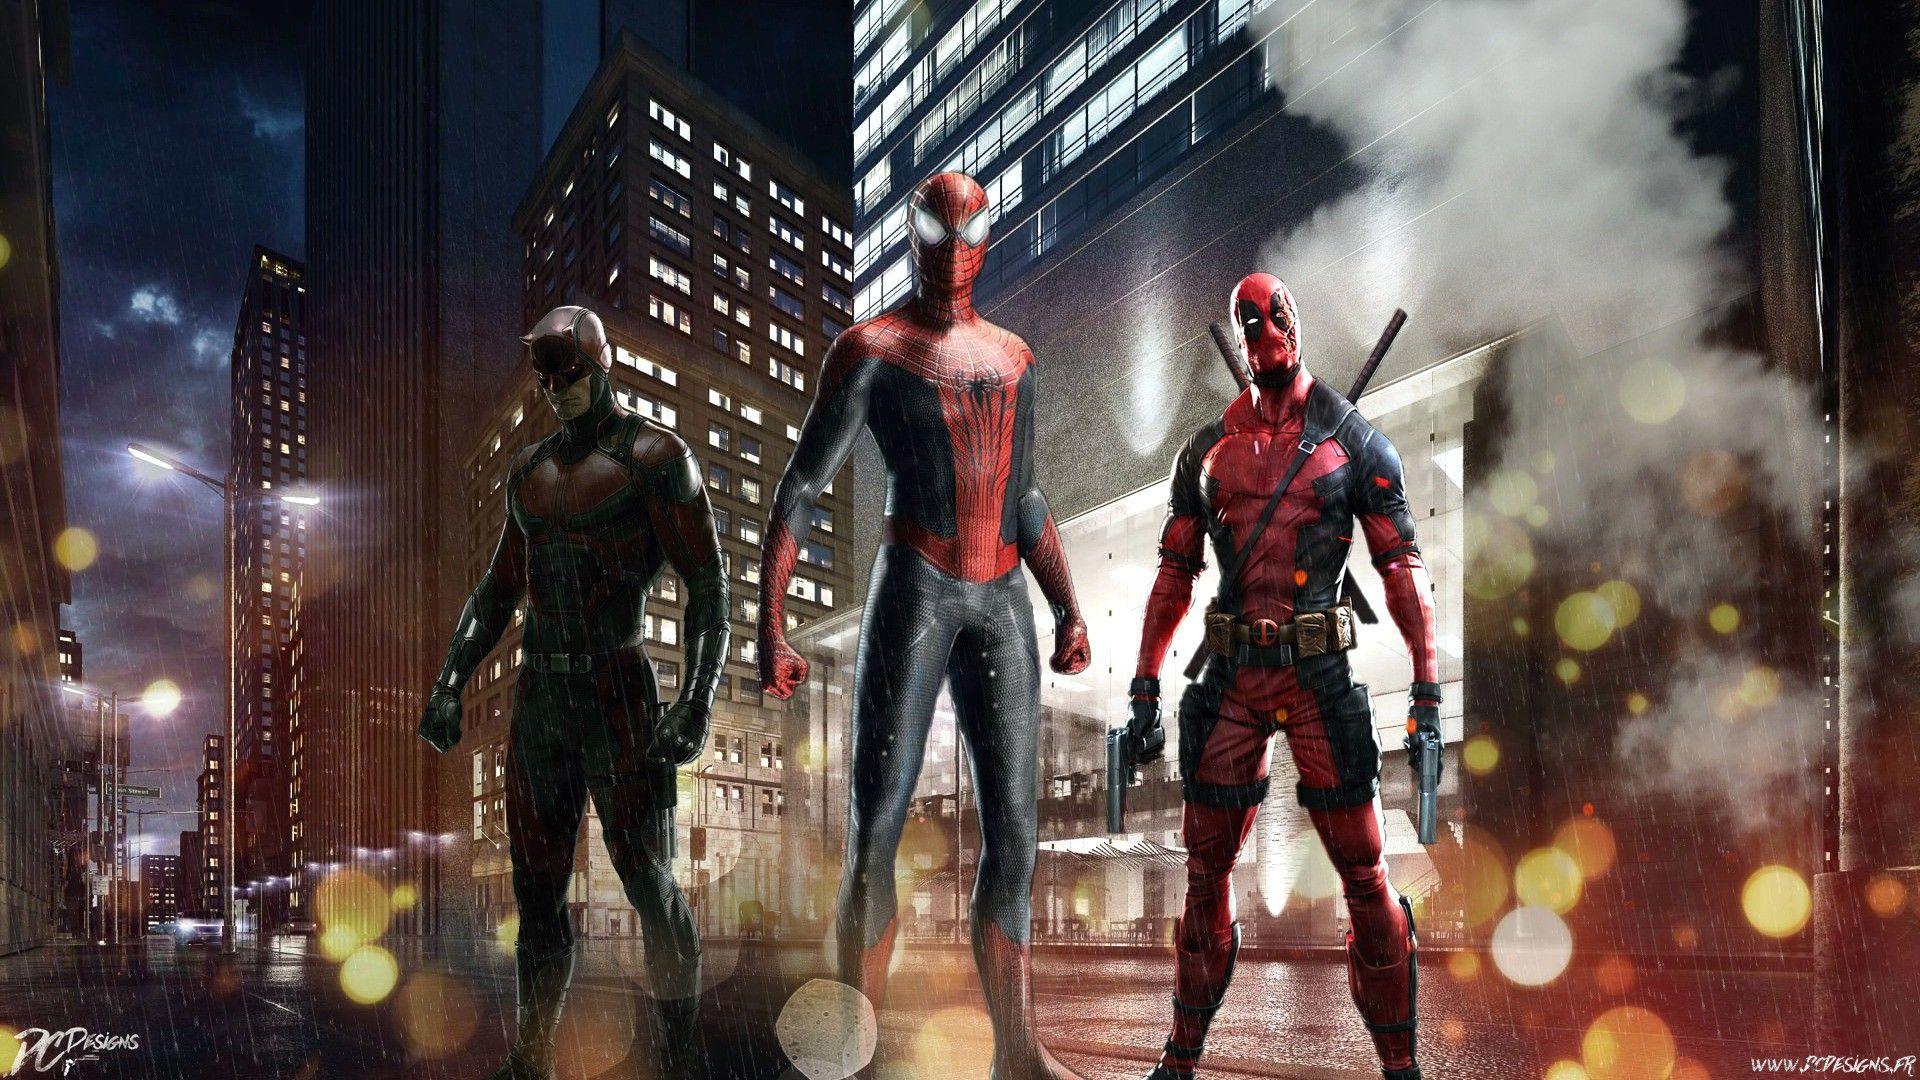 Red team, spider man, deadpool, daredevil wallpaper. movies and tv